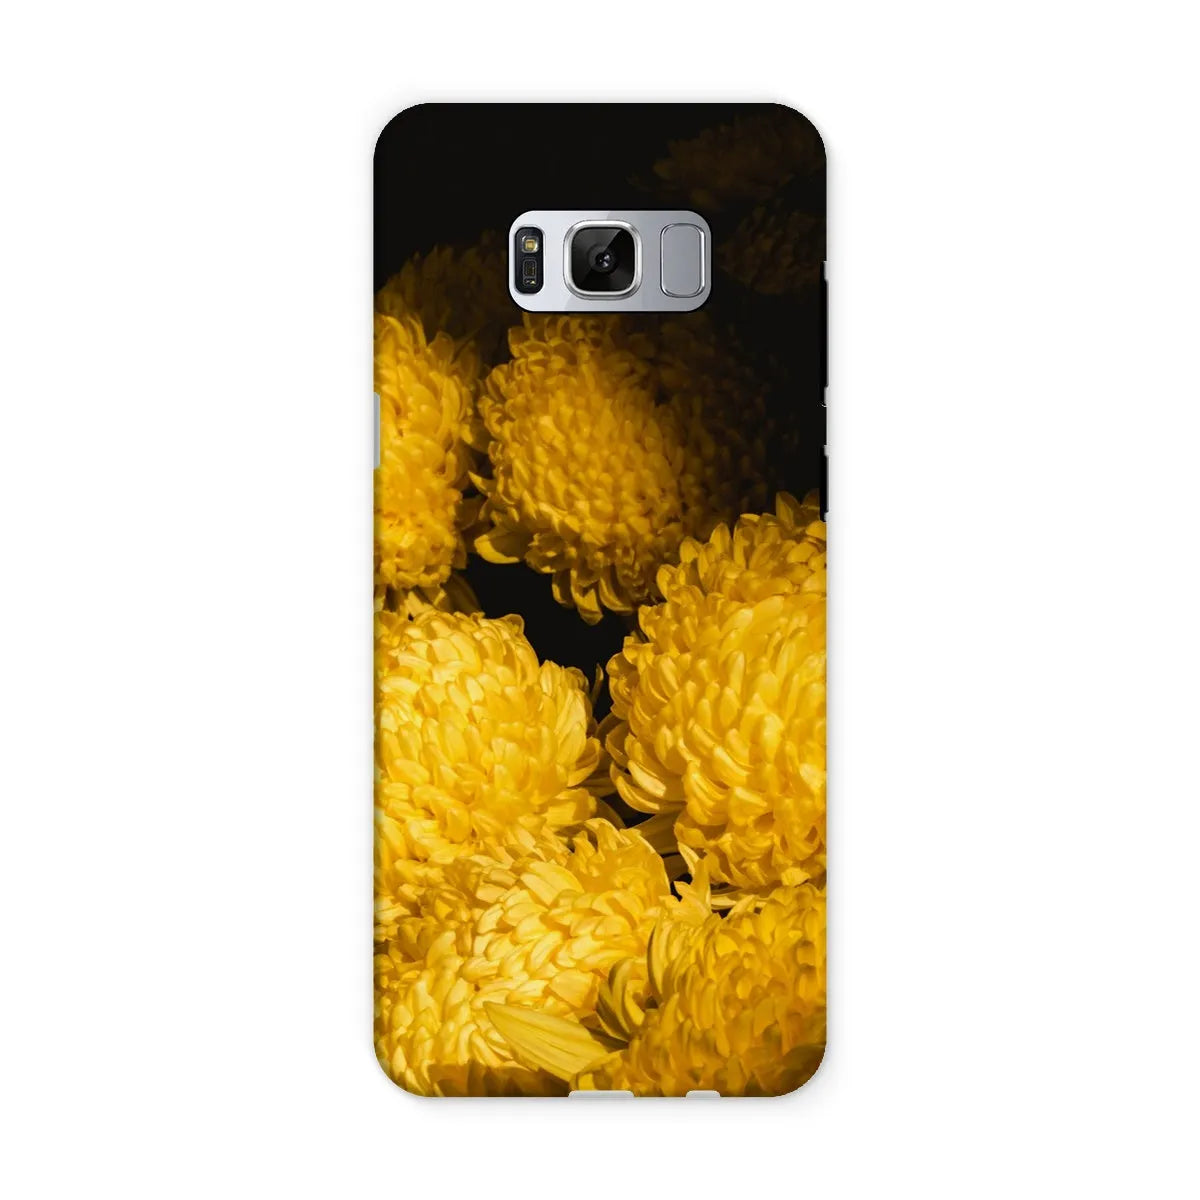 Field Of Dreams Tough Phone Case - Samsung Galaxy S8 / Matte - Mobile Phone Cases - Aesthetic Art